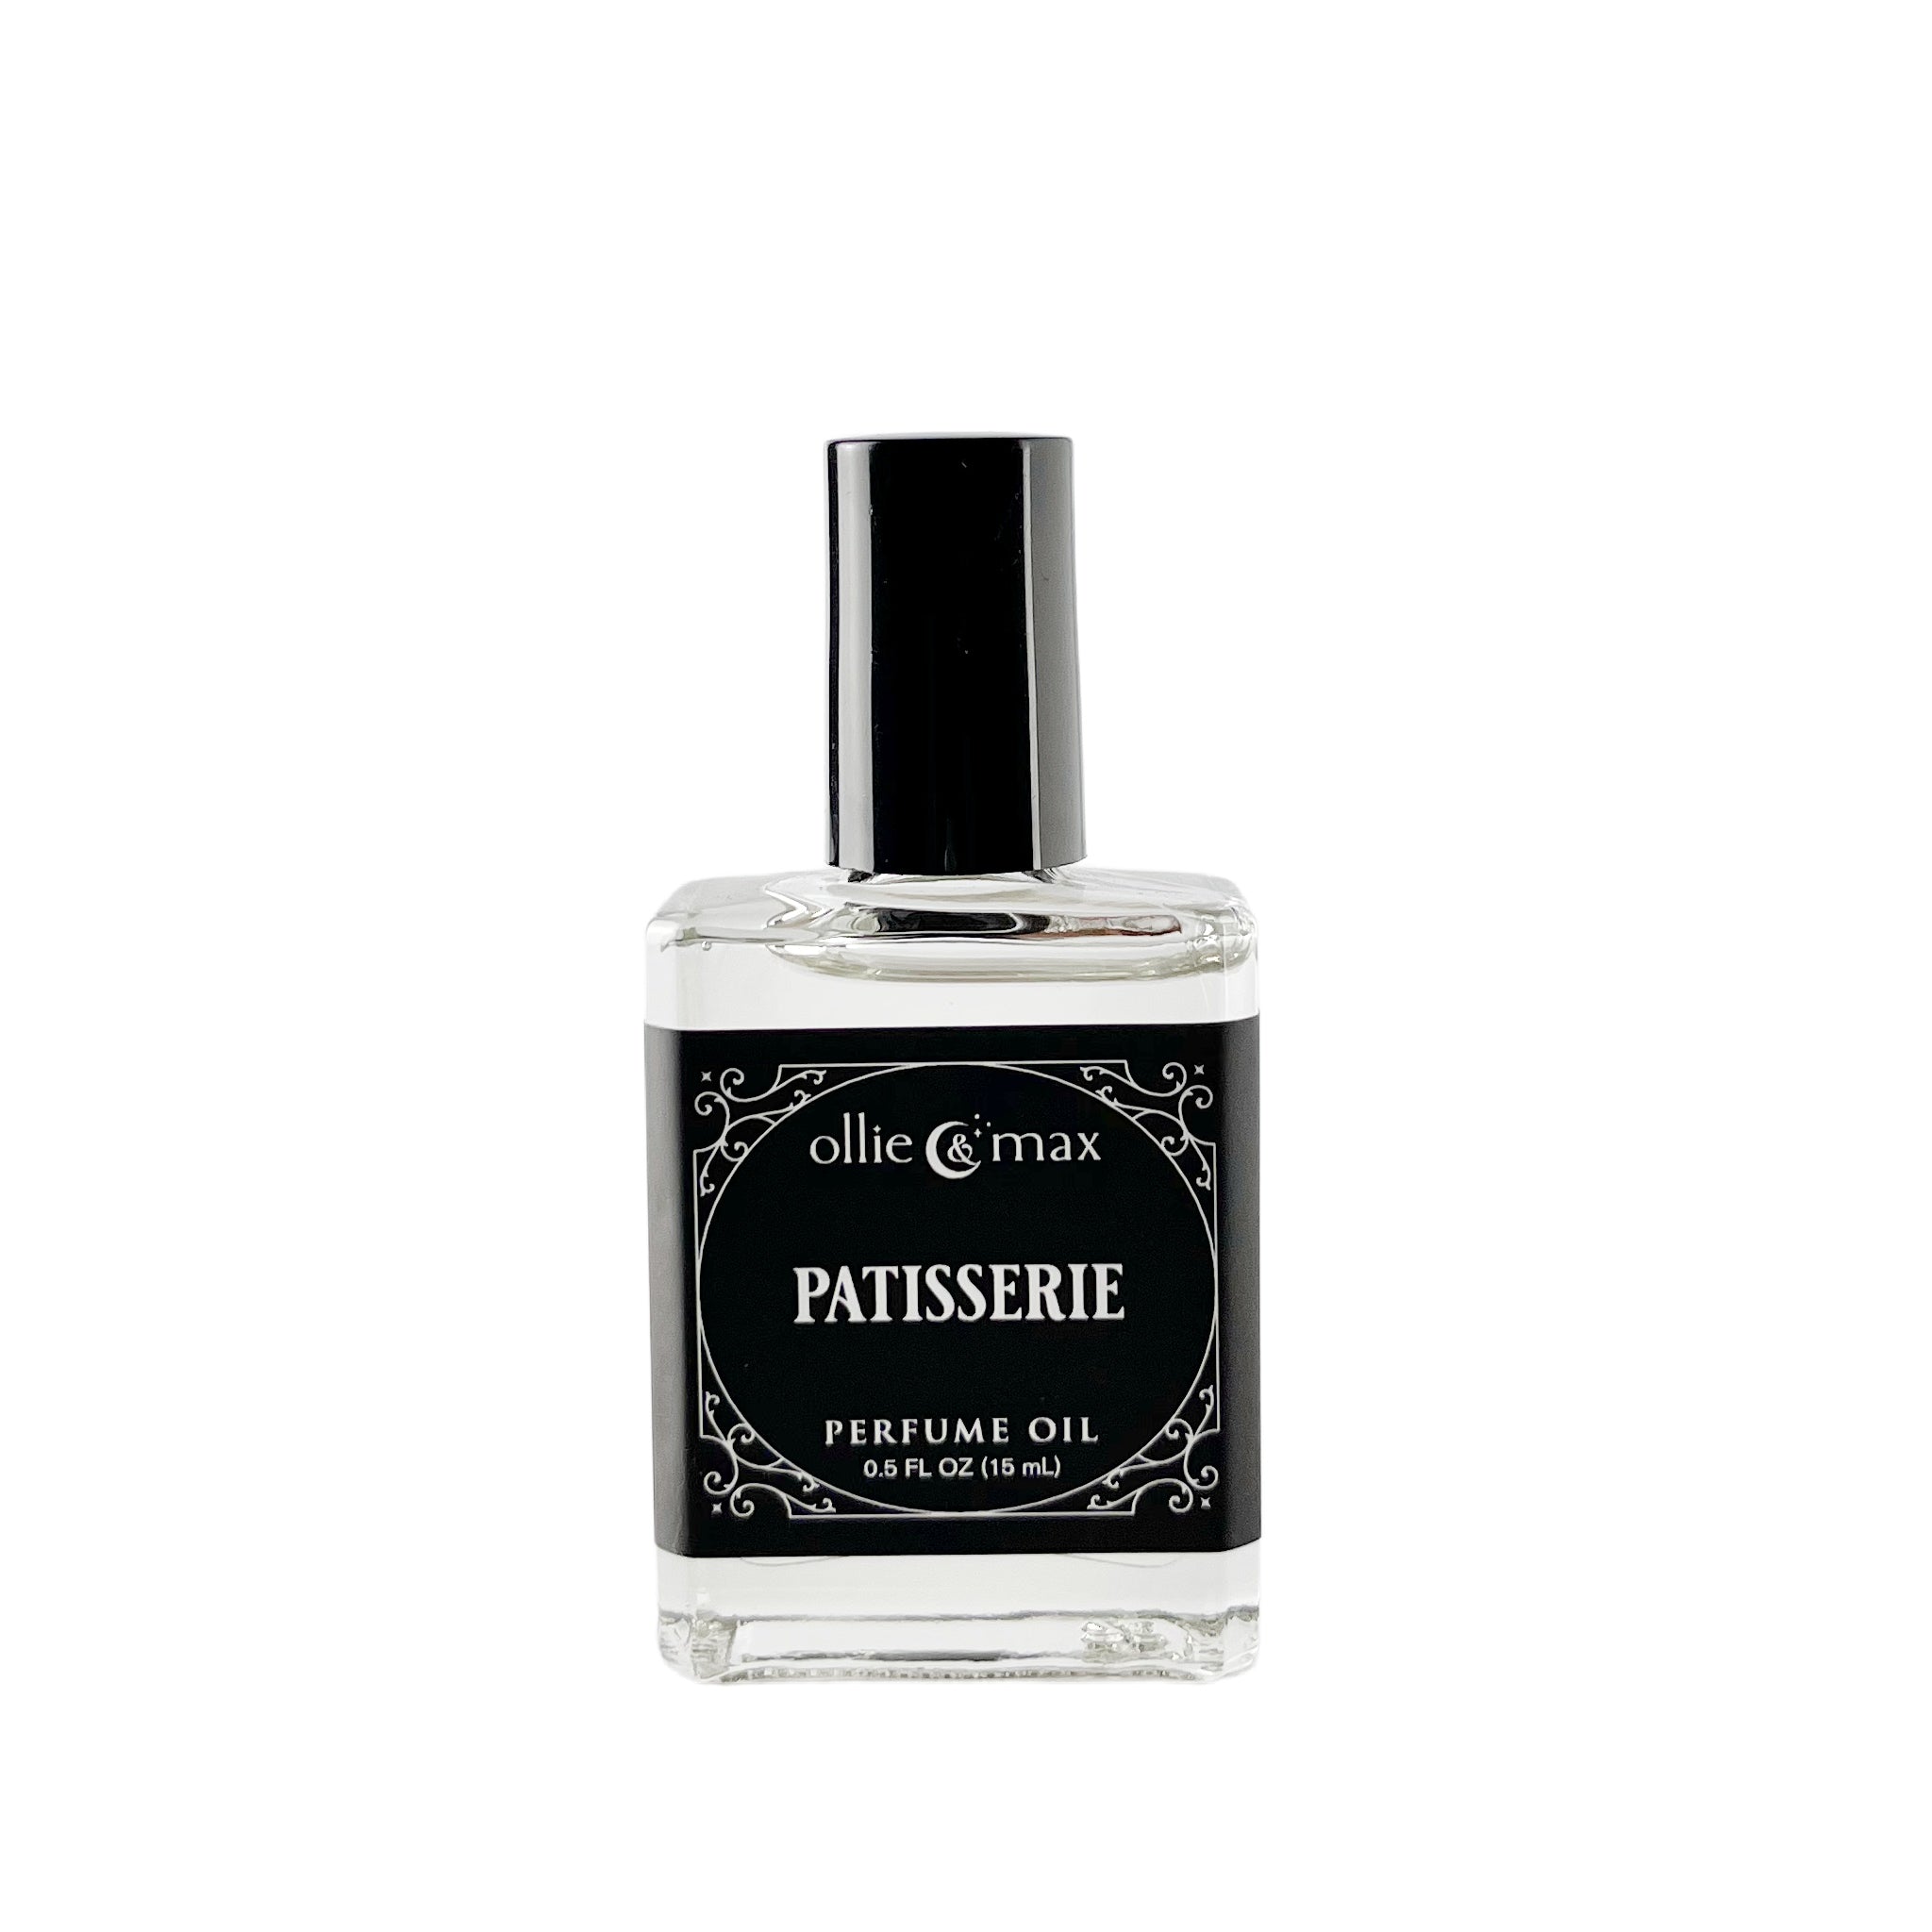 glass rectangle bottle with black cap and label, patisserie perfume oil, 15ml